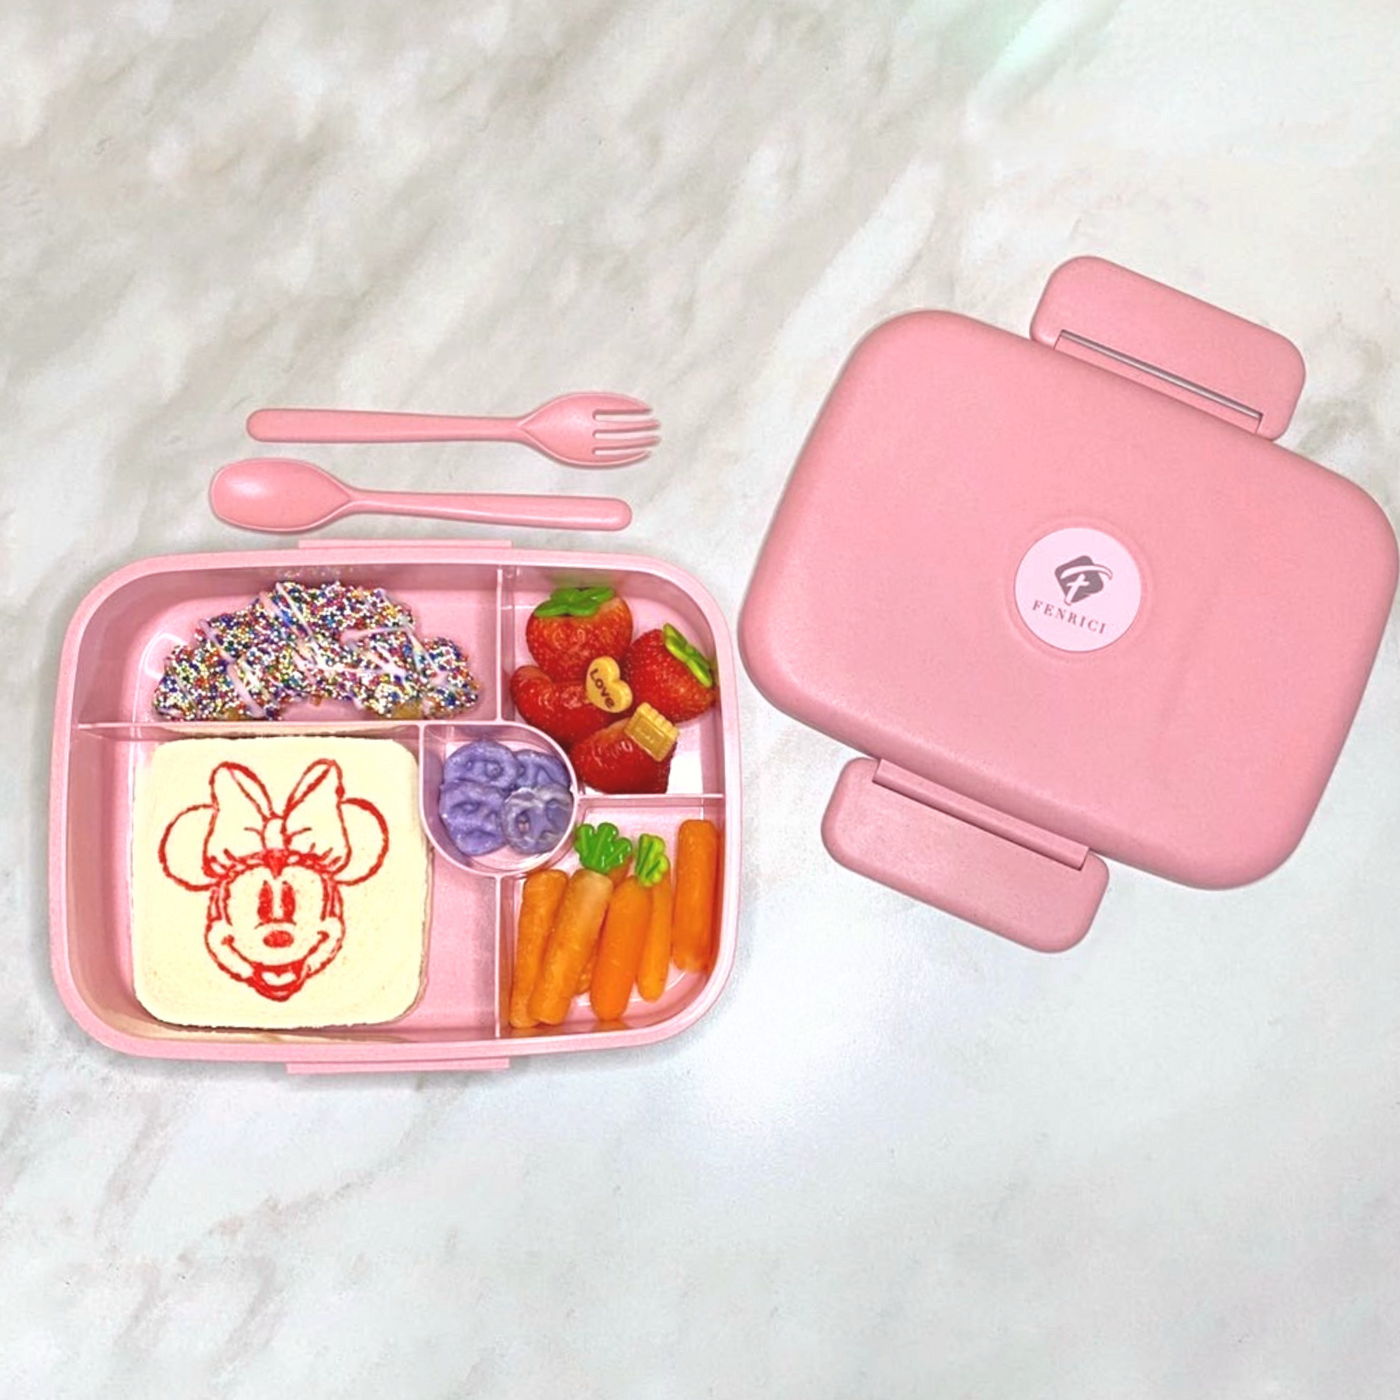 Fenrici Bento Box Lunch Box For Kids and Teens, Made with Wheat Straw, 5  Leakproof Compartments, BPA…See more Fenrici Bento Box Lunch Box For Kids  and